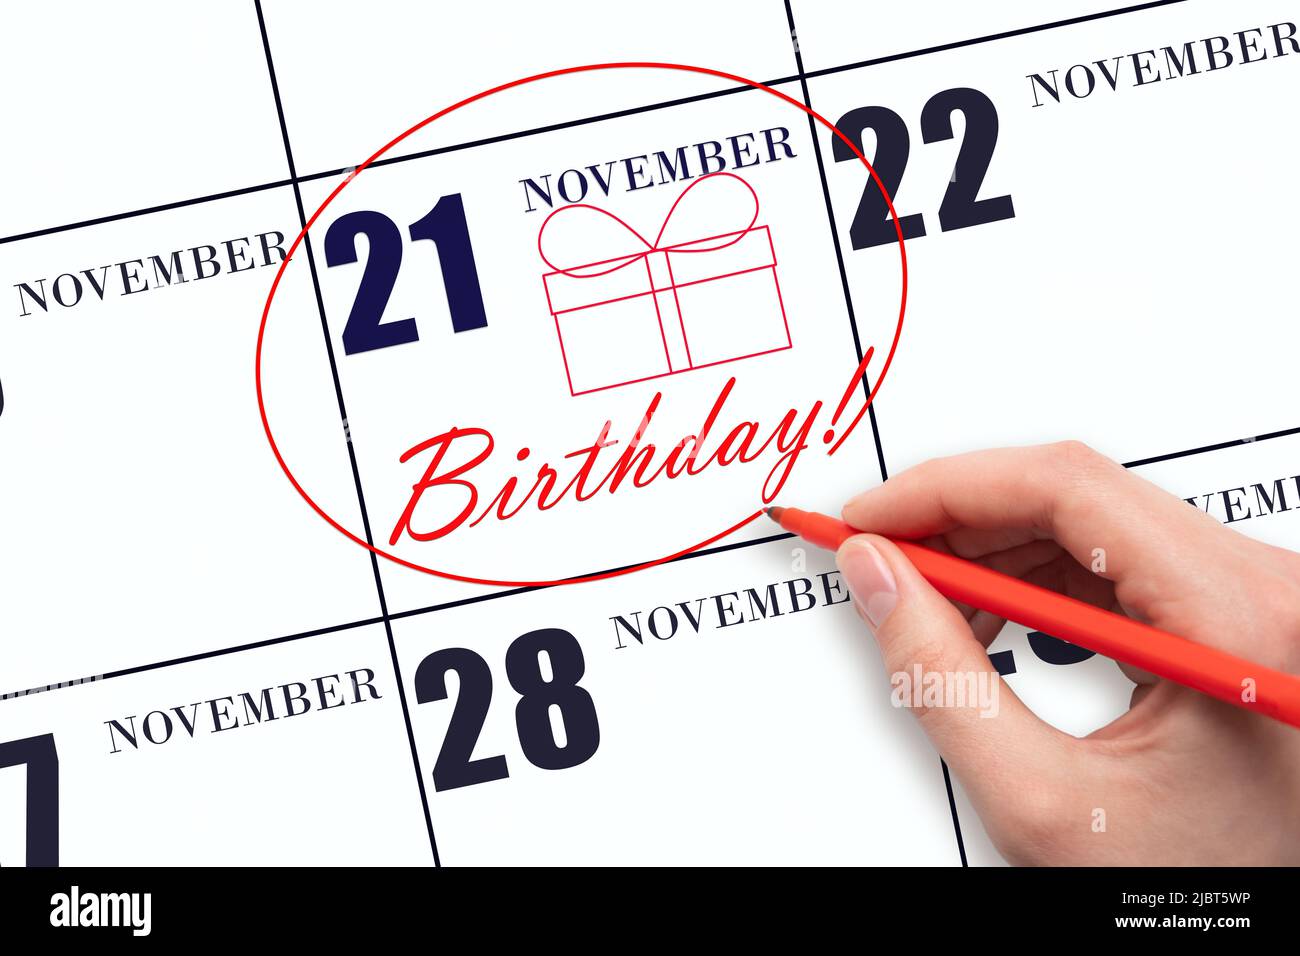 21st day of November. The hand circles the date on the calendar 21 November, draws a gift box and writes the text Birthday. Holiday. Autumn month, day Stock Photo